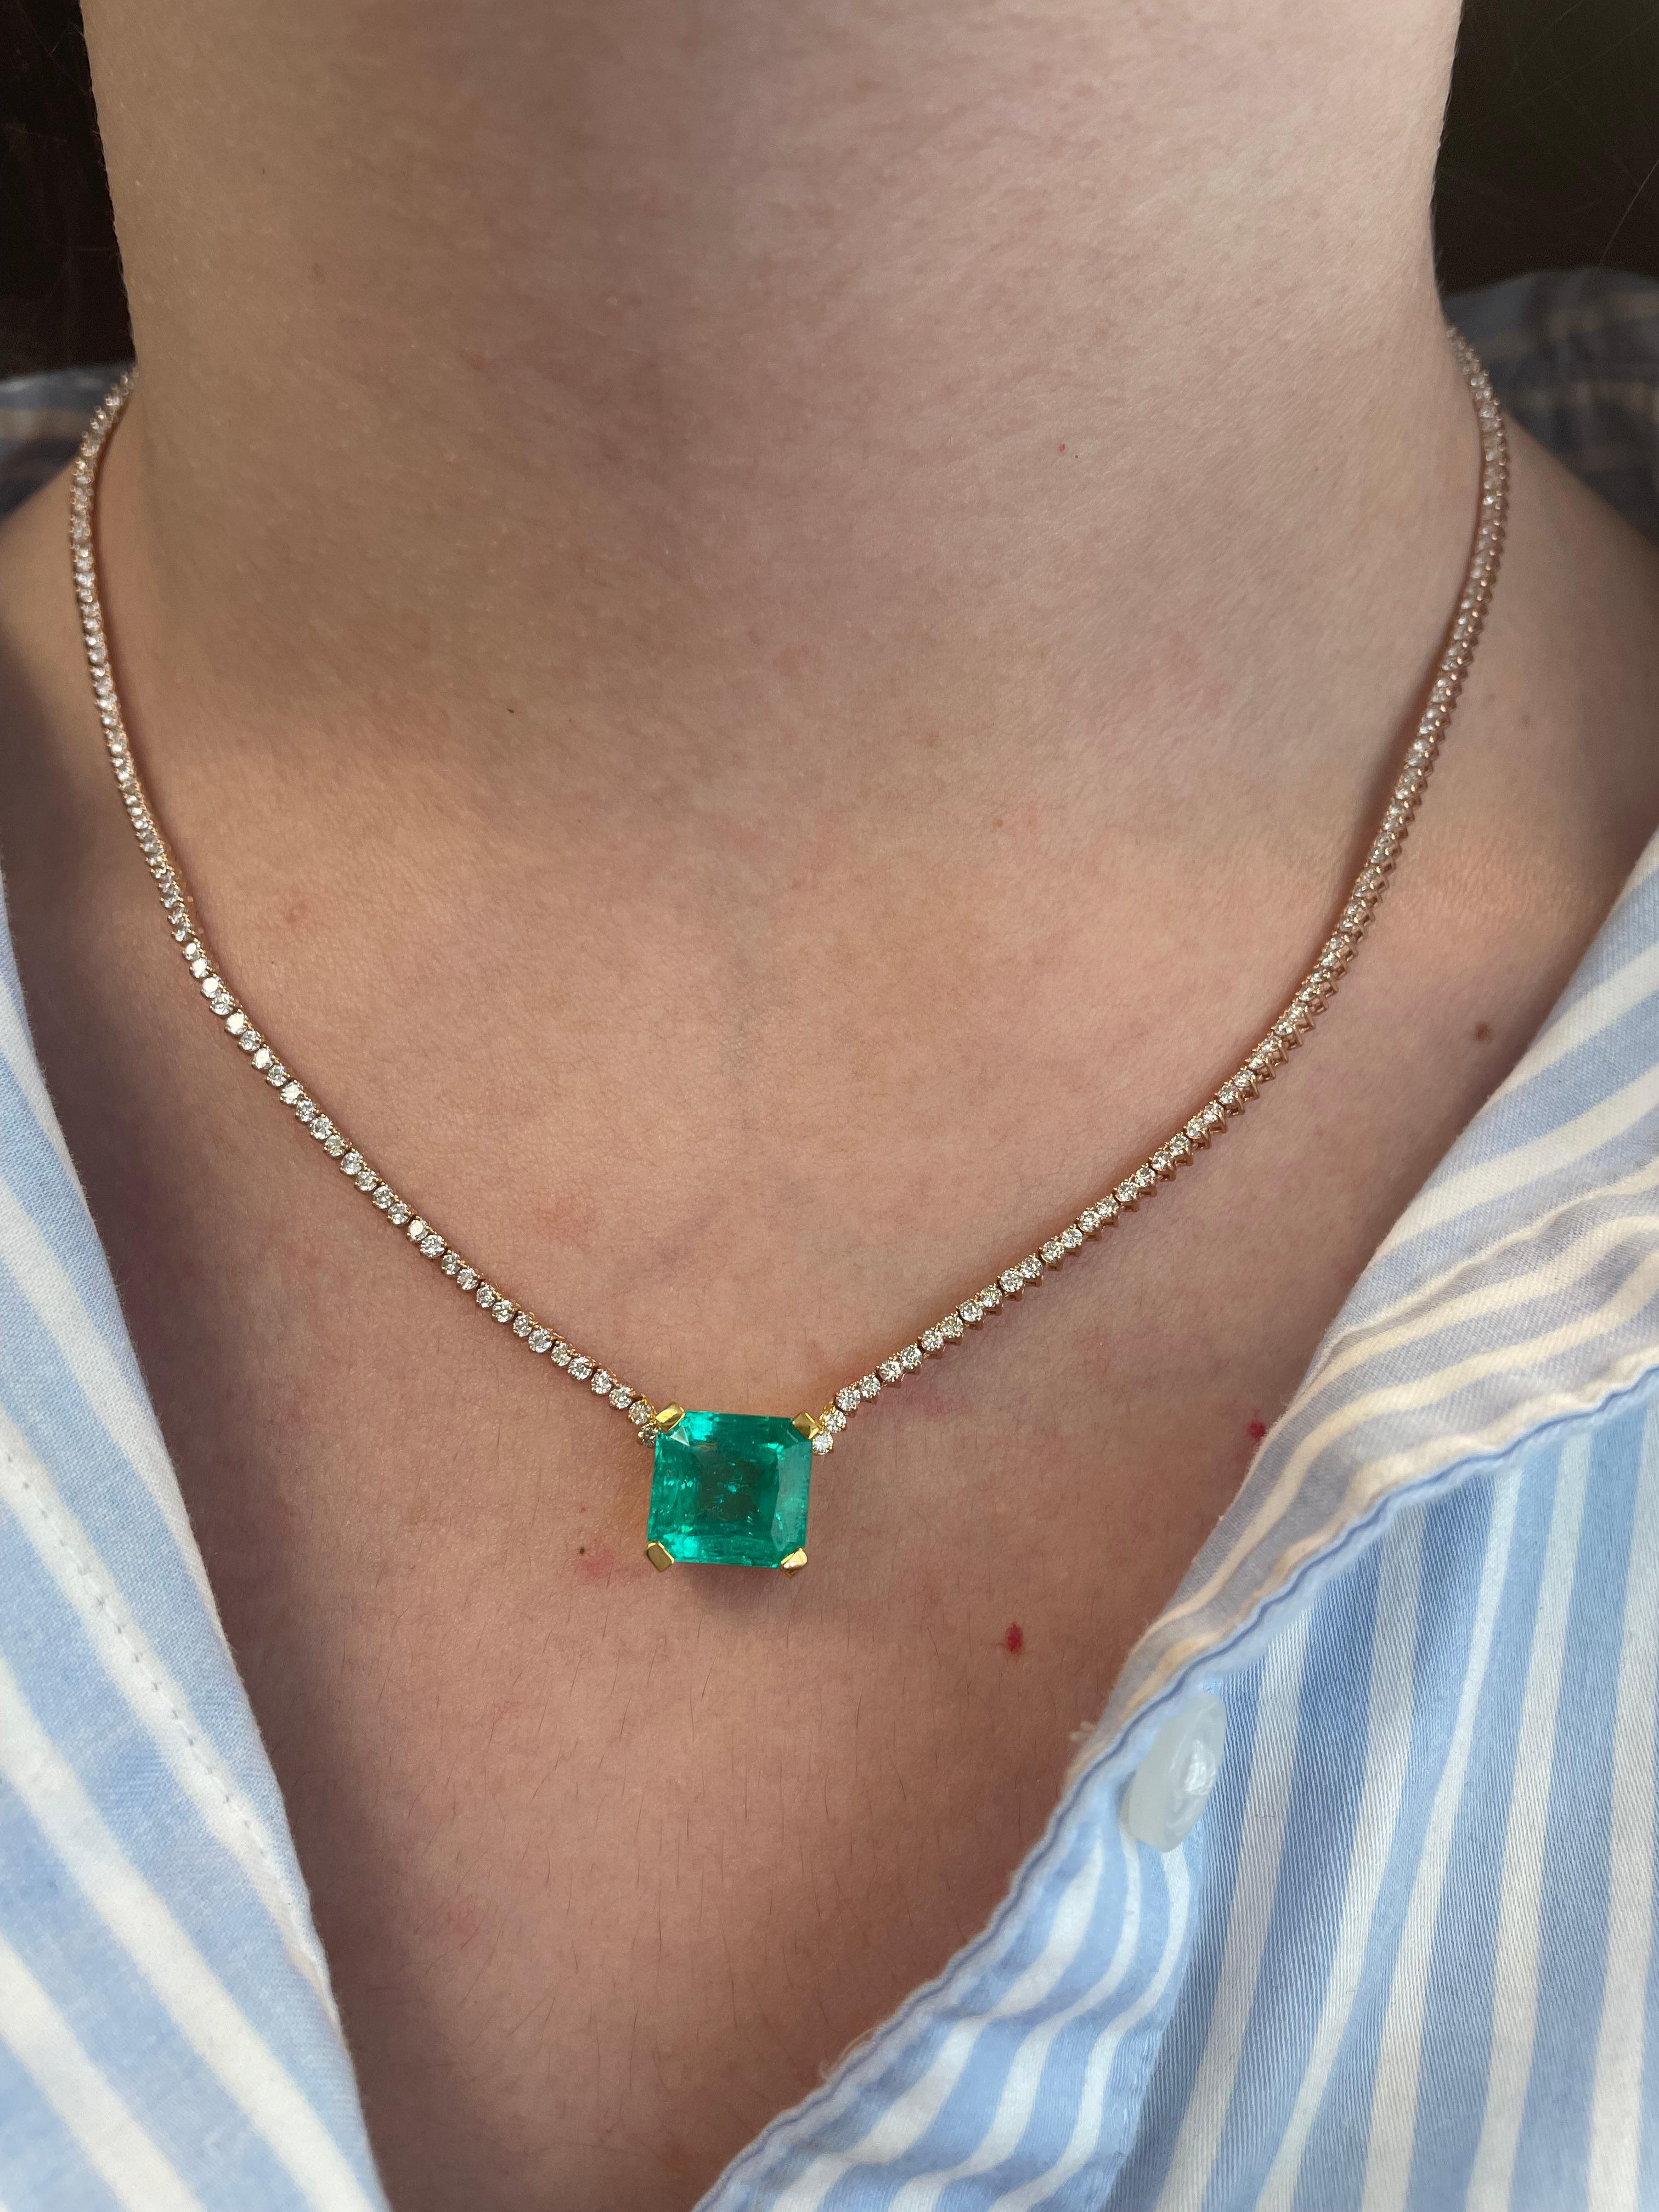 Modern diamond tennis necklace with a Colombian emerald center stone.
6.12 carat emerald cut Colombian emerald, apx F2. 236 round brilliant diamonds, 3.99 carats. Approximately H/I color and SI clarity. 18k rose & yellow gold, 11.22 grams,